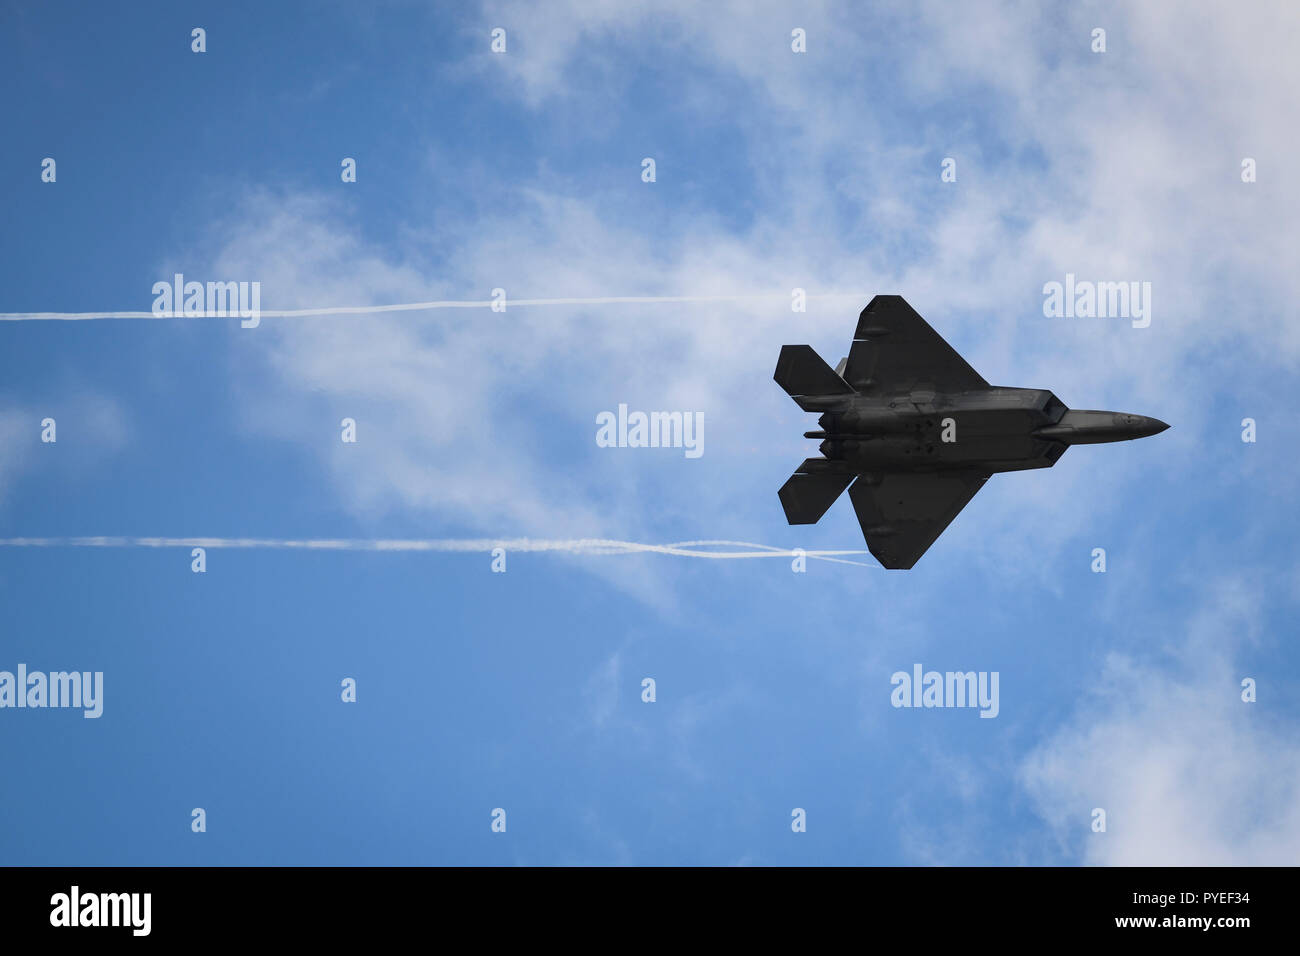 An F-22 Raptor from the Air Combat Commands Raptor Demonstration Team performs a flyover during an aerial demonstration at the U.S. Air Force Master Sgt. John A. Chapman Medal of Honor celebration at Hurlburt Field, Florida, Oct. 26, 2018. During the event, 12 aircraft from across the Air Force participated in an aerial demonstration in honor of Master Sgt. John Chapman, a combat controller who made the ultimate sacrifice during an intense battle in the mountains of Afghanistan. Chapman was posthumously awarded the Medal of Honor on Aug. 22, 2018. (U.S. Air Force photo by Senior Airman Dennis  Stock Photo